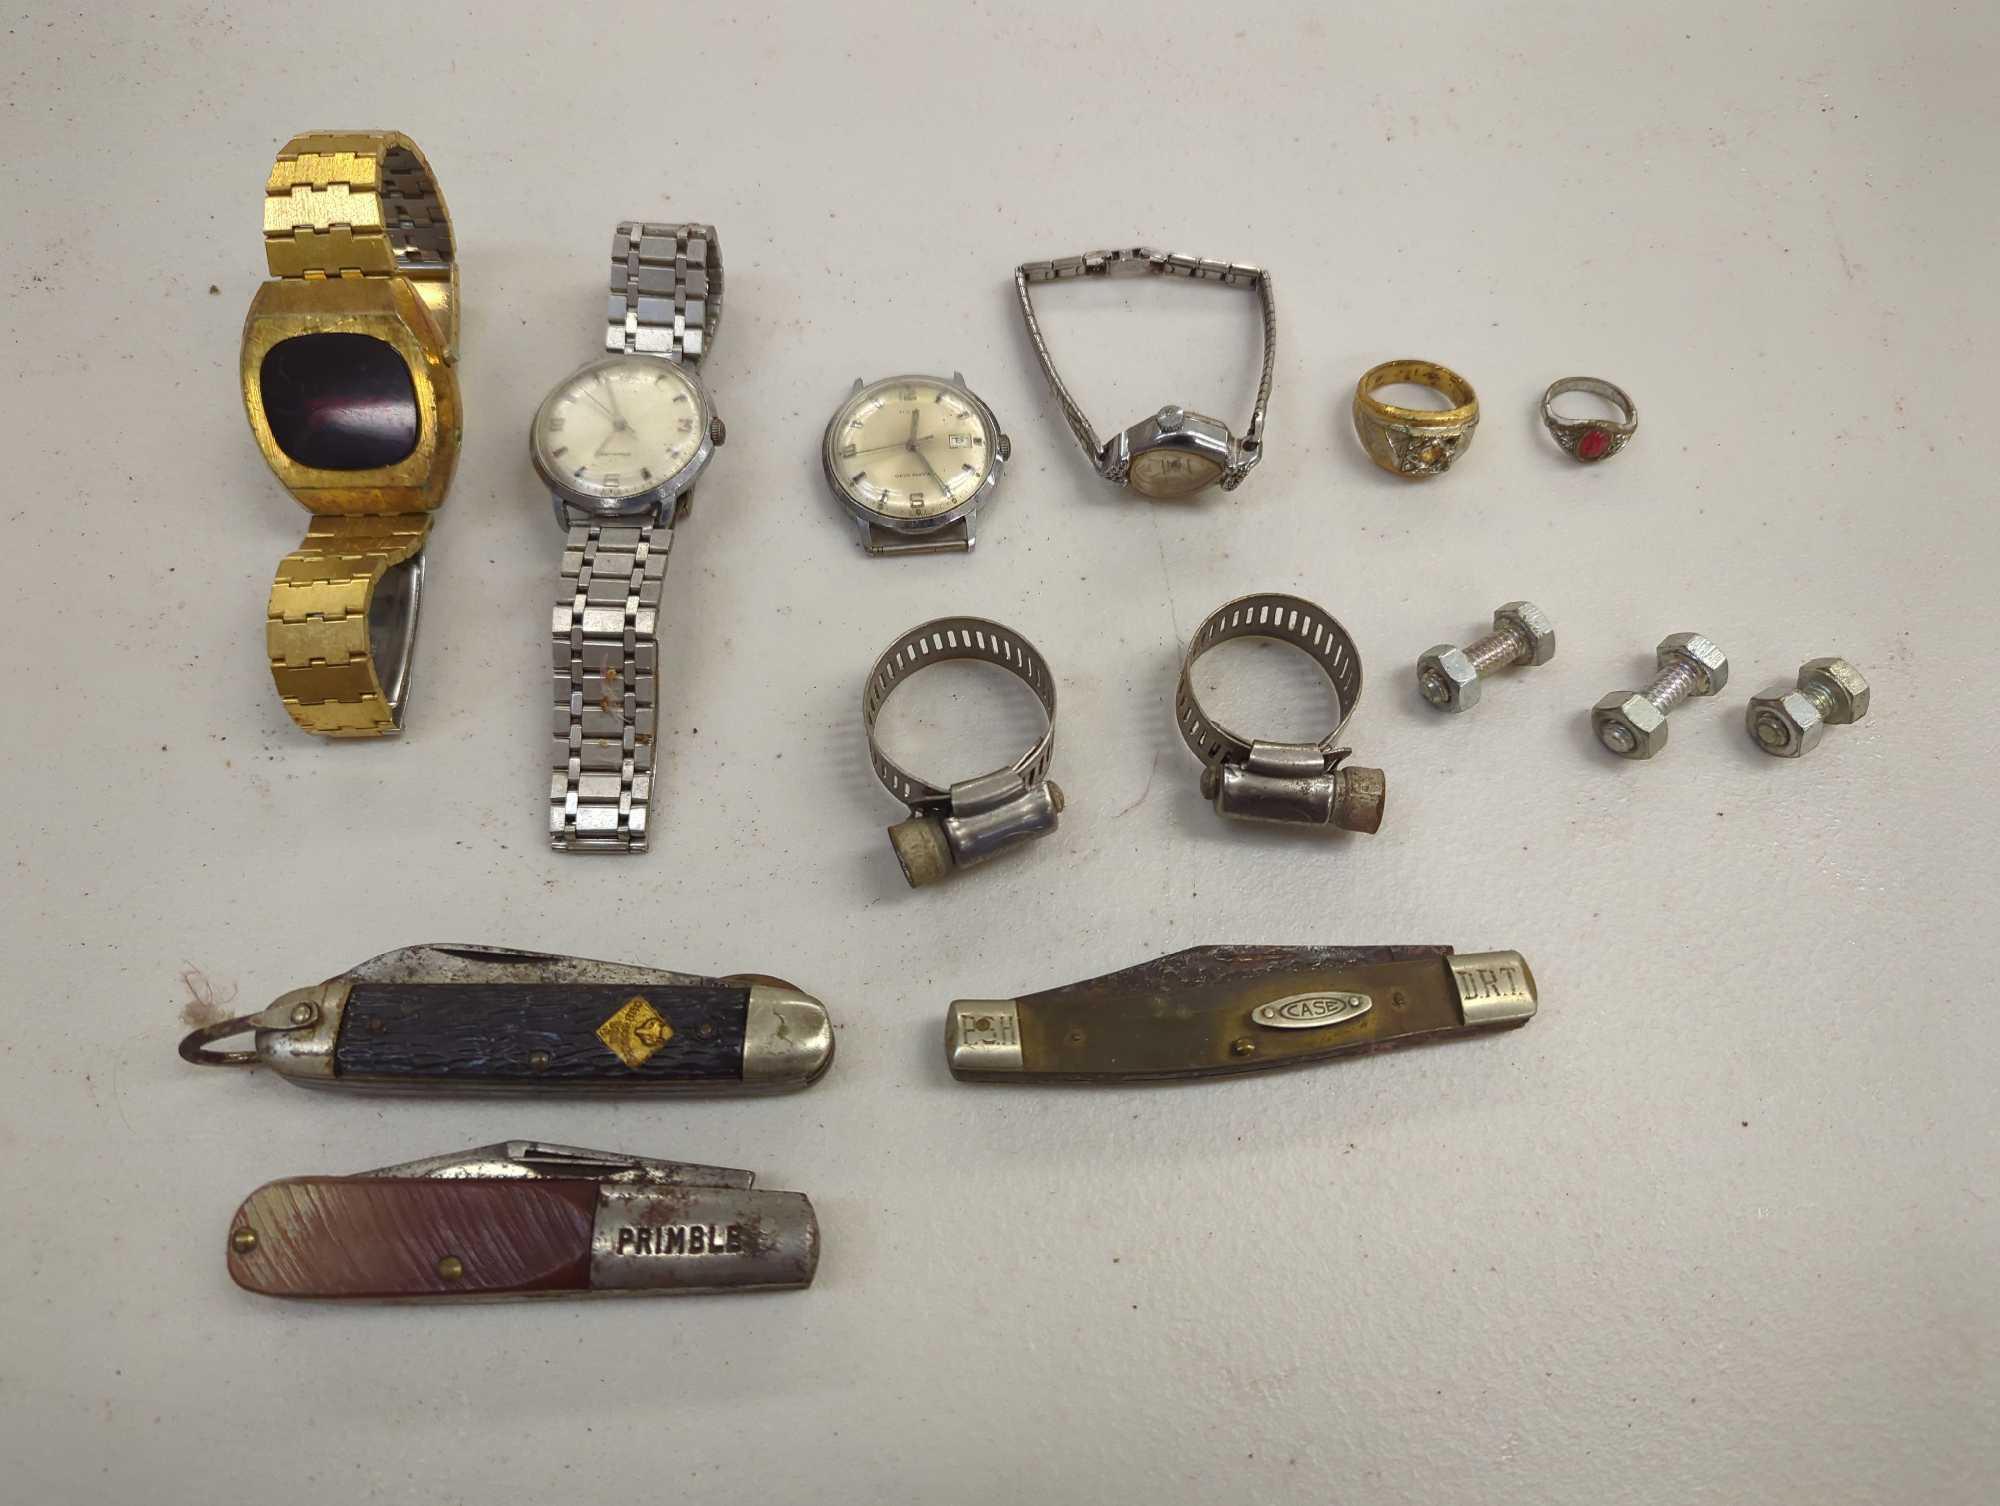 Black container including wrist watches, pocket knives, and rings. Comes as is shown in photos.